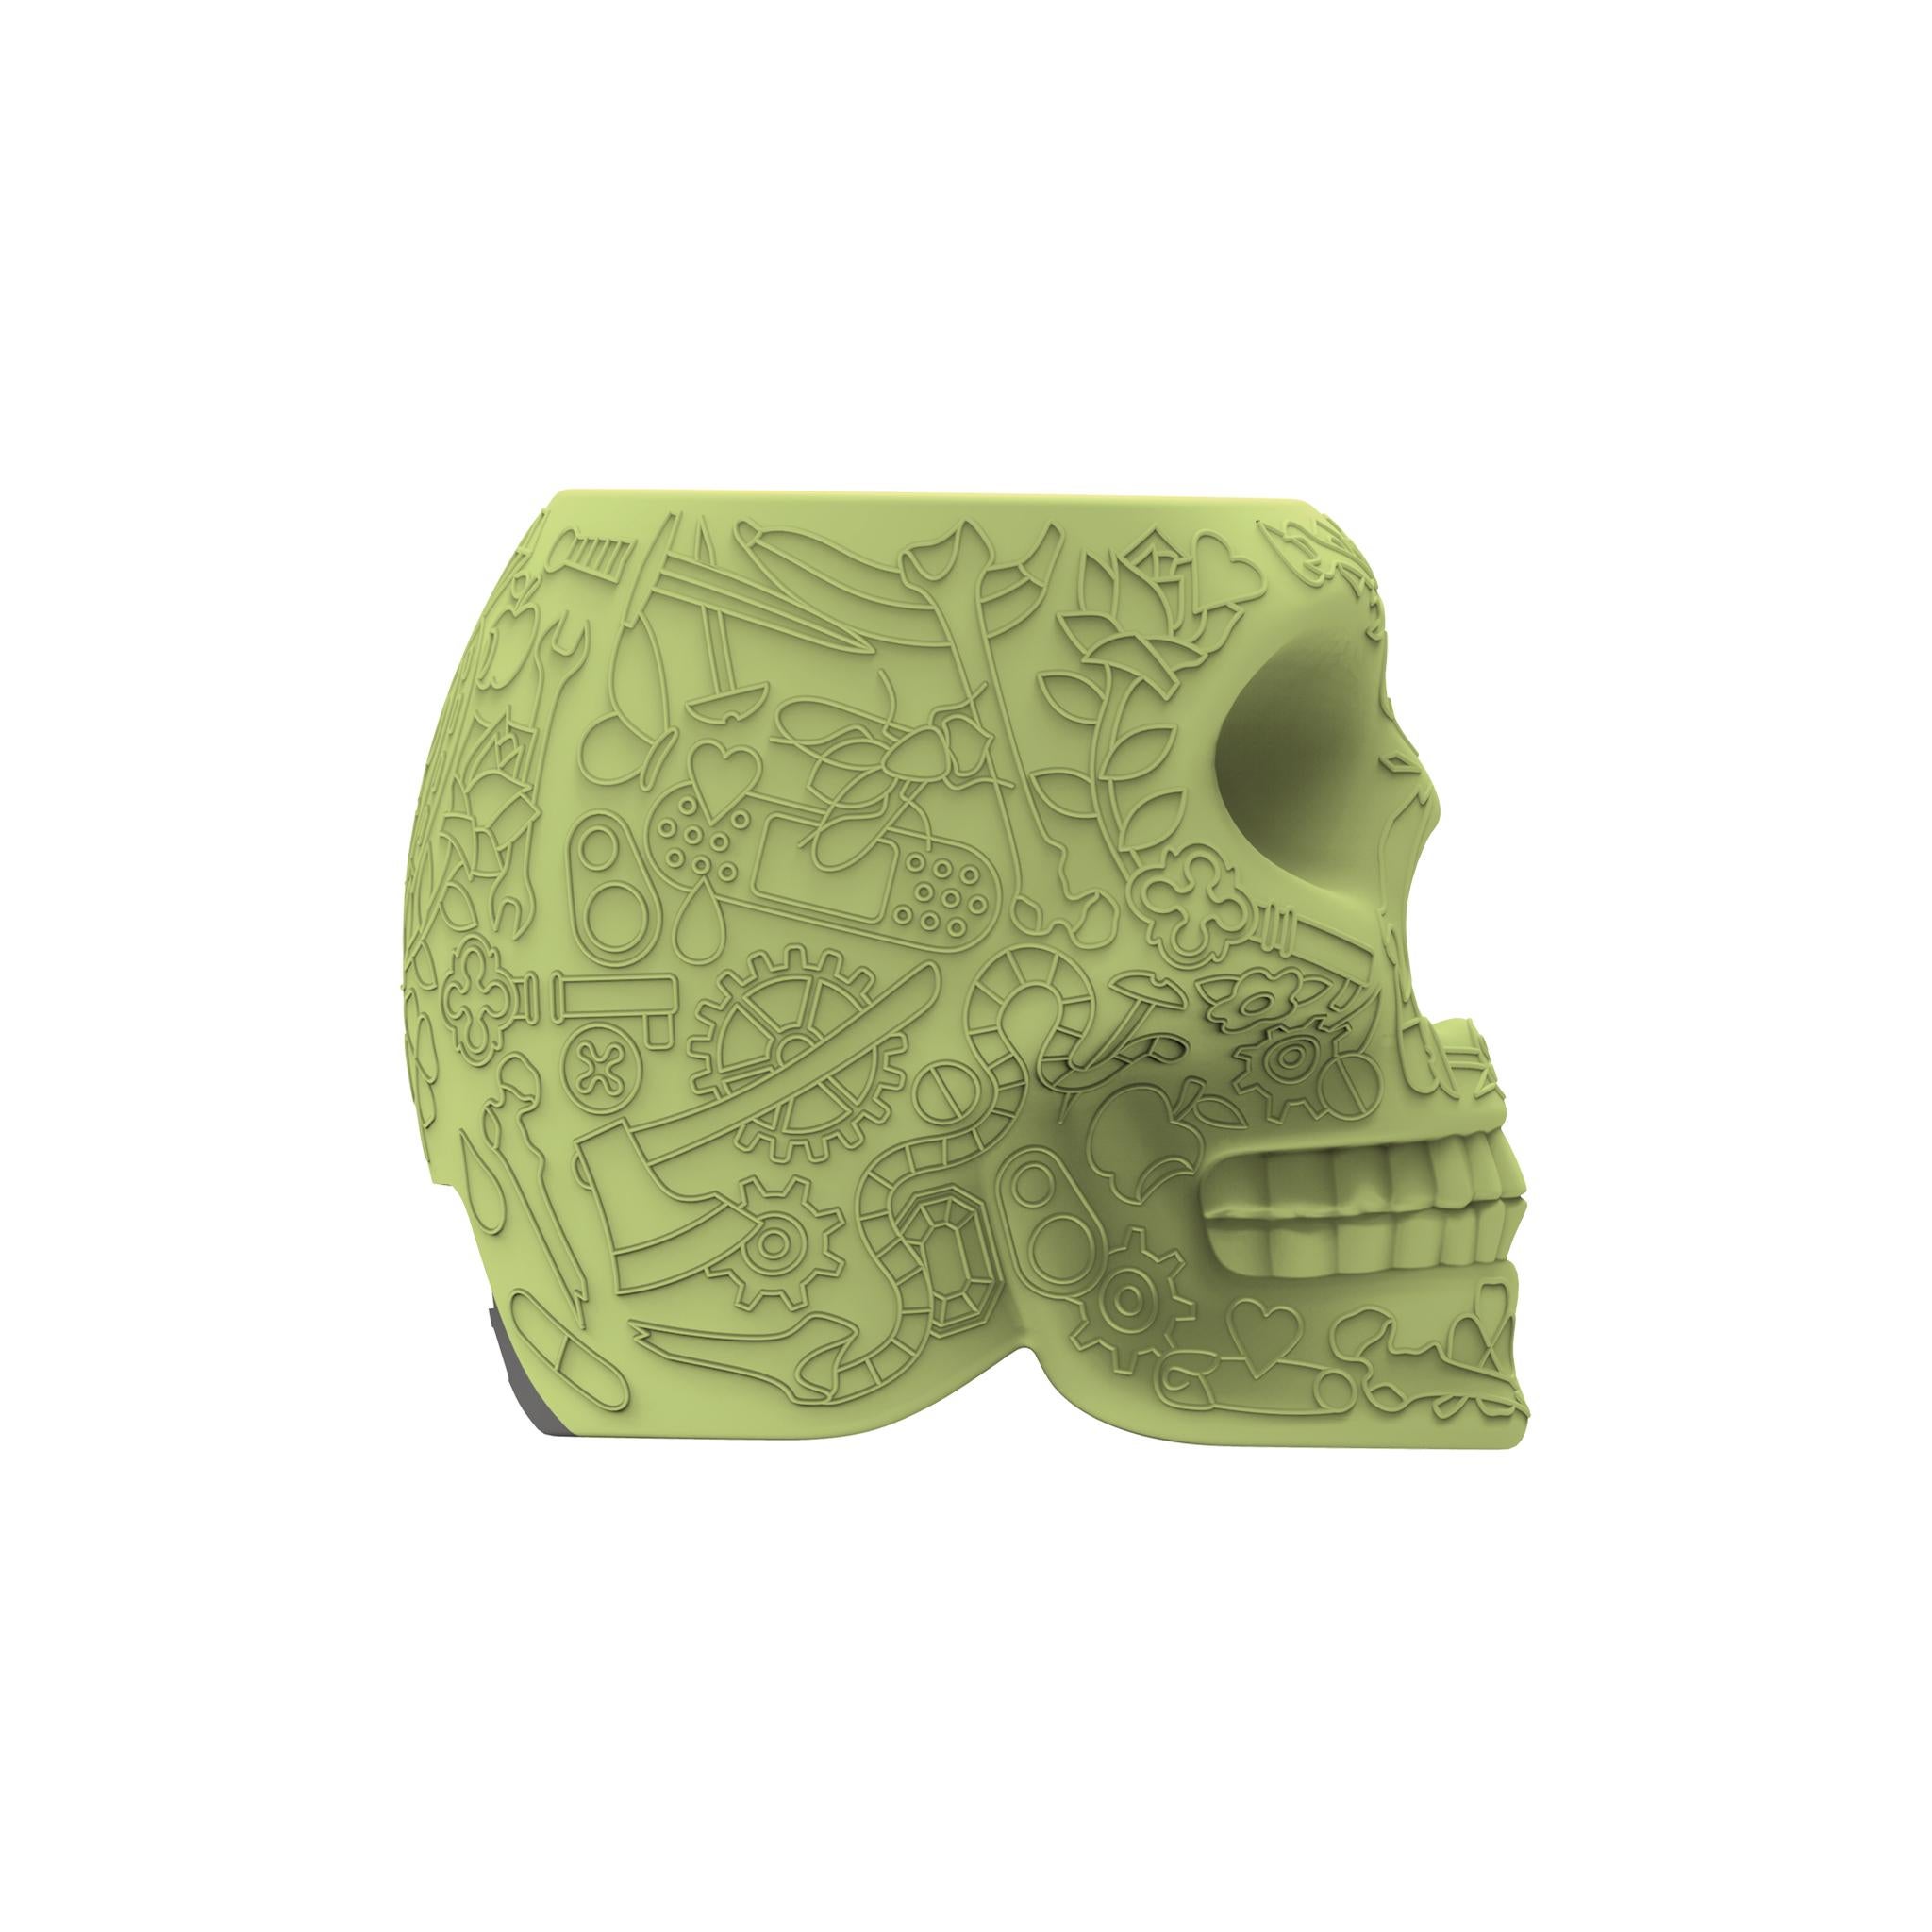 Mexico skull mini power bank battery charger
In stock in Los Angeles

Job says he was inspired by a legendary figure who lived wrapped in mystery: 'the singer without a name'.

